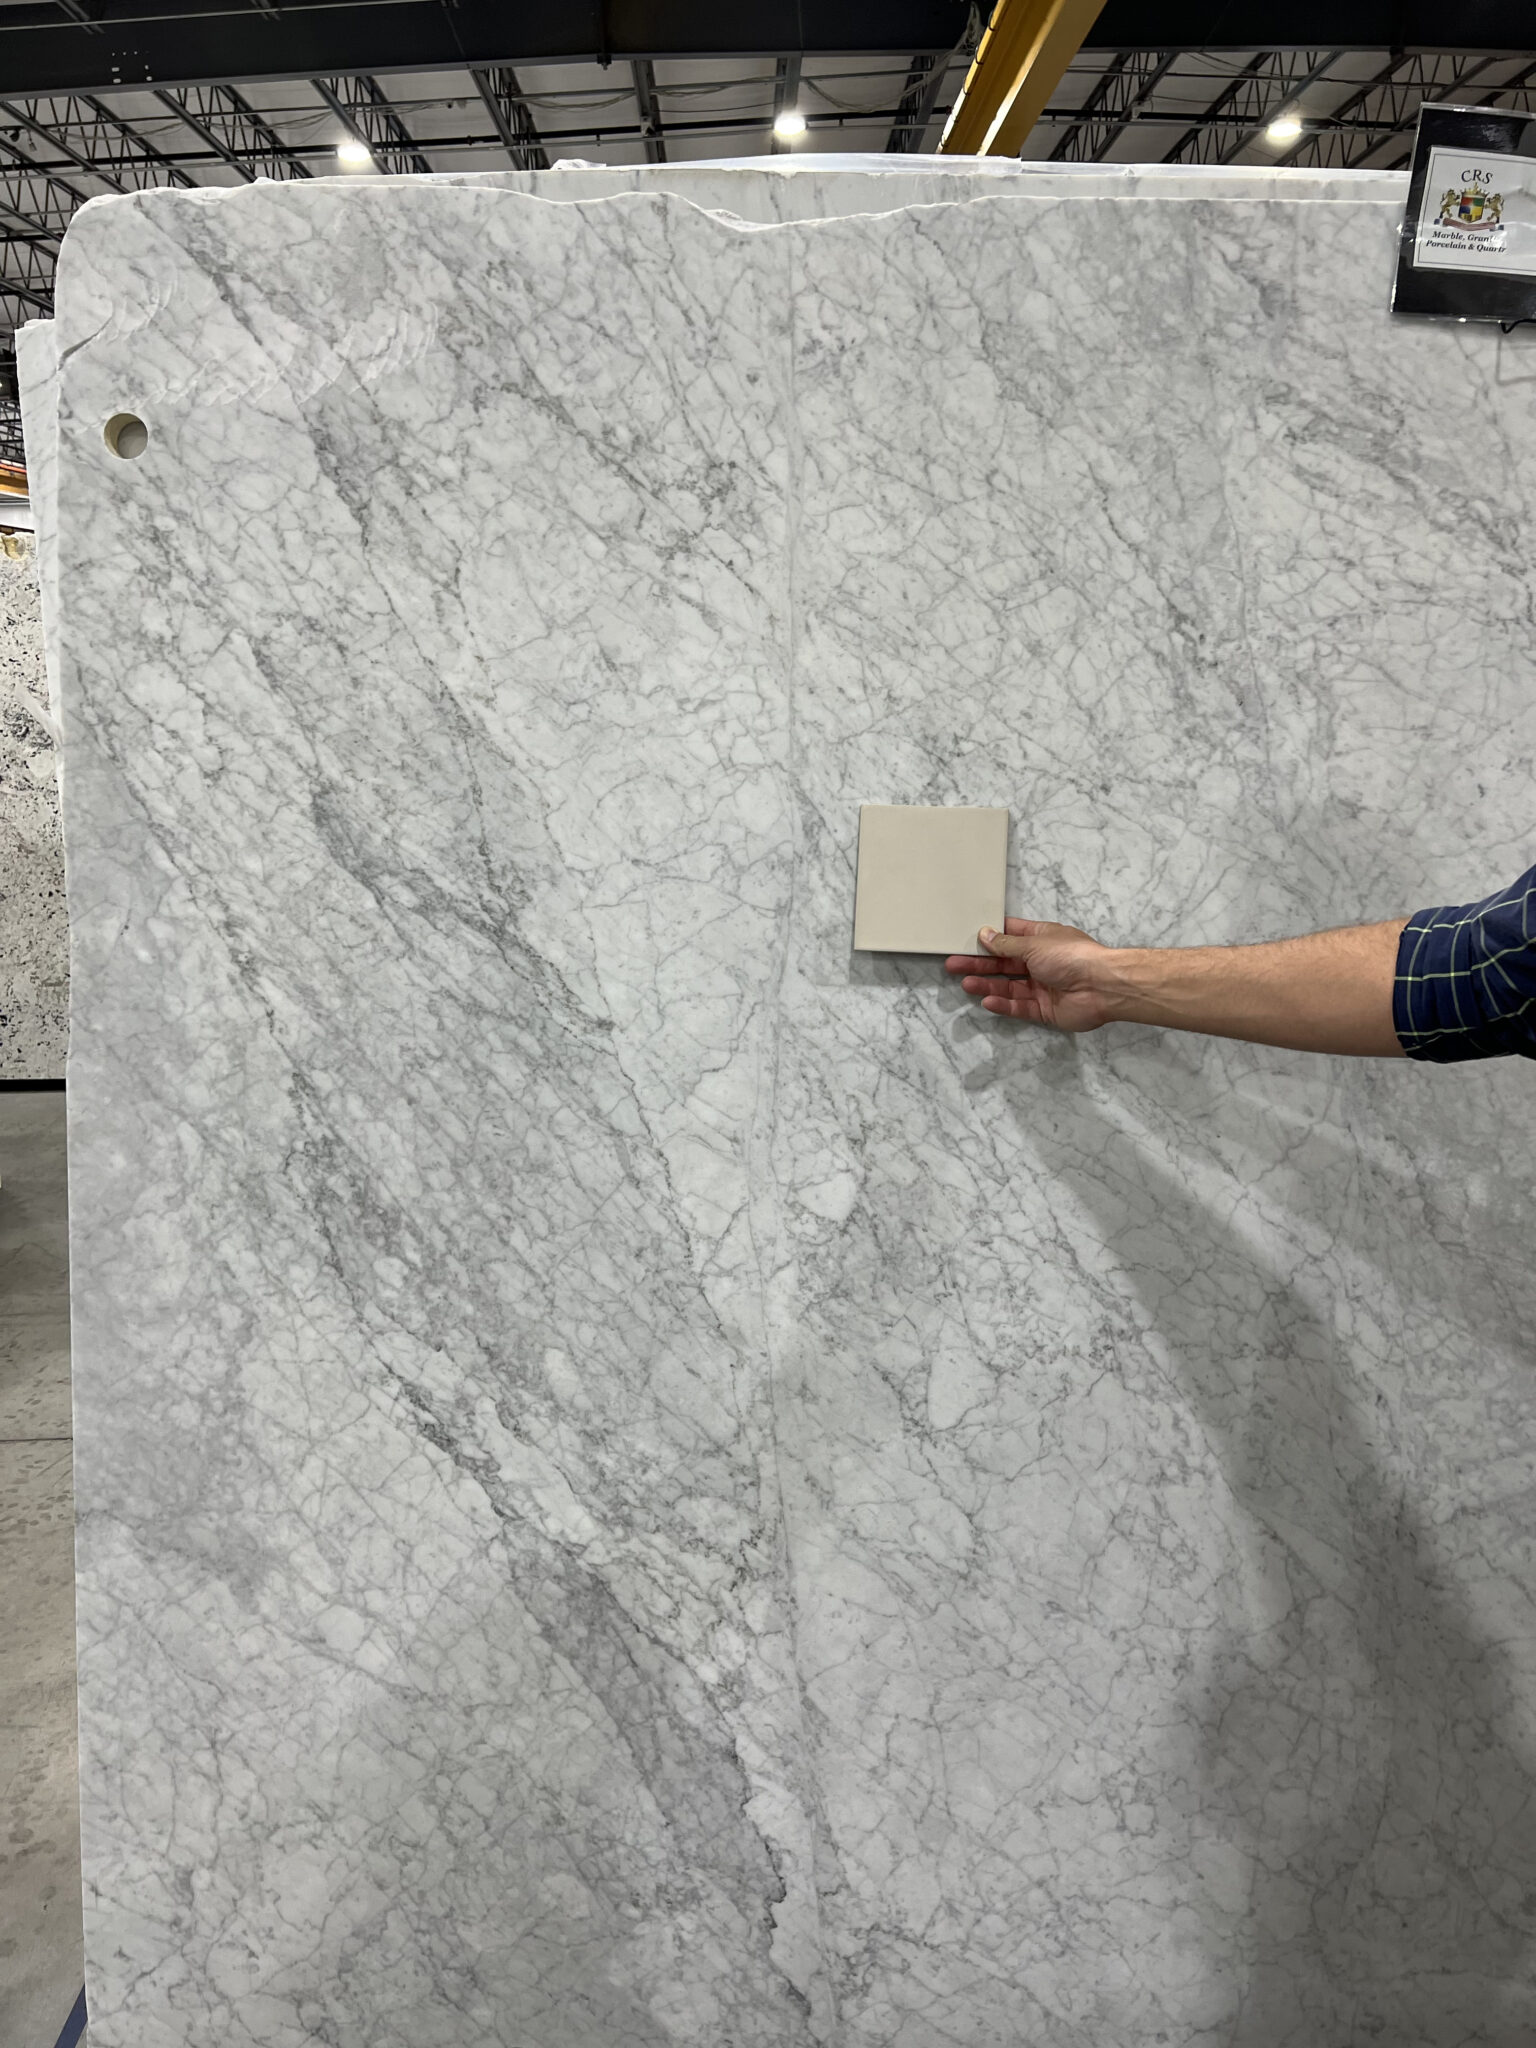 Our New Marble And Soapstone Countertops in the Kitchen! - Chris Loves Julia